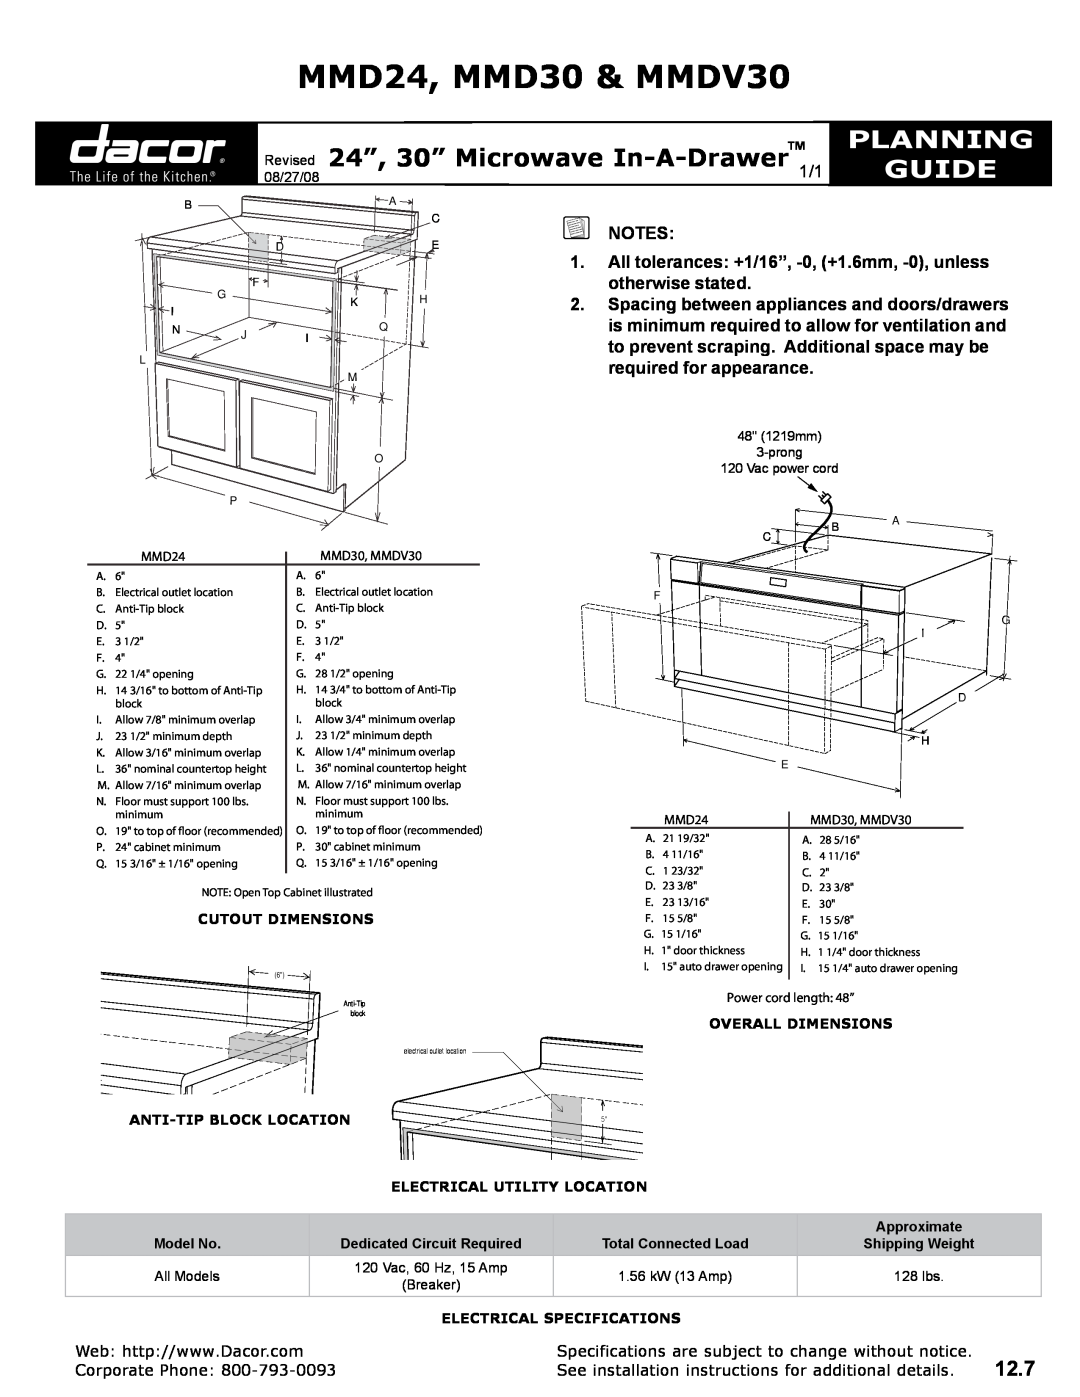 Dacor dimensions MMD24, MMD30 & MMDV30, Revised 24”, 30” Microwave In-A-Drawer, Planning, Guide, 12.7, Corporate Phone 